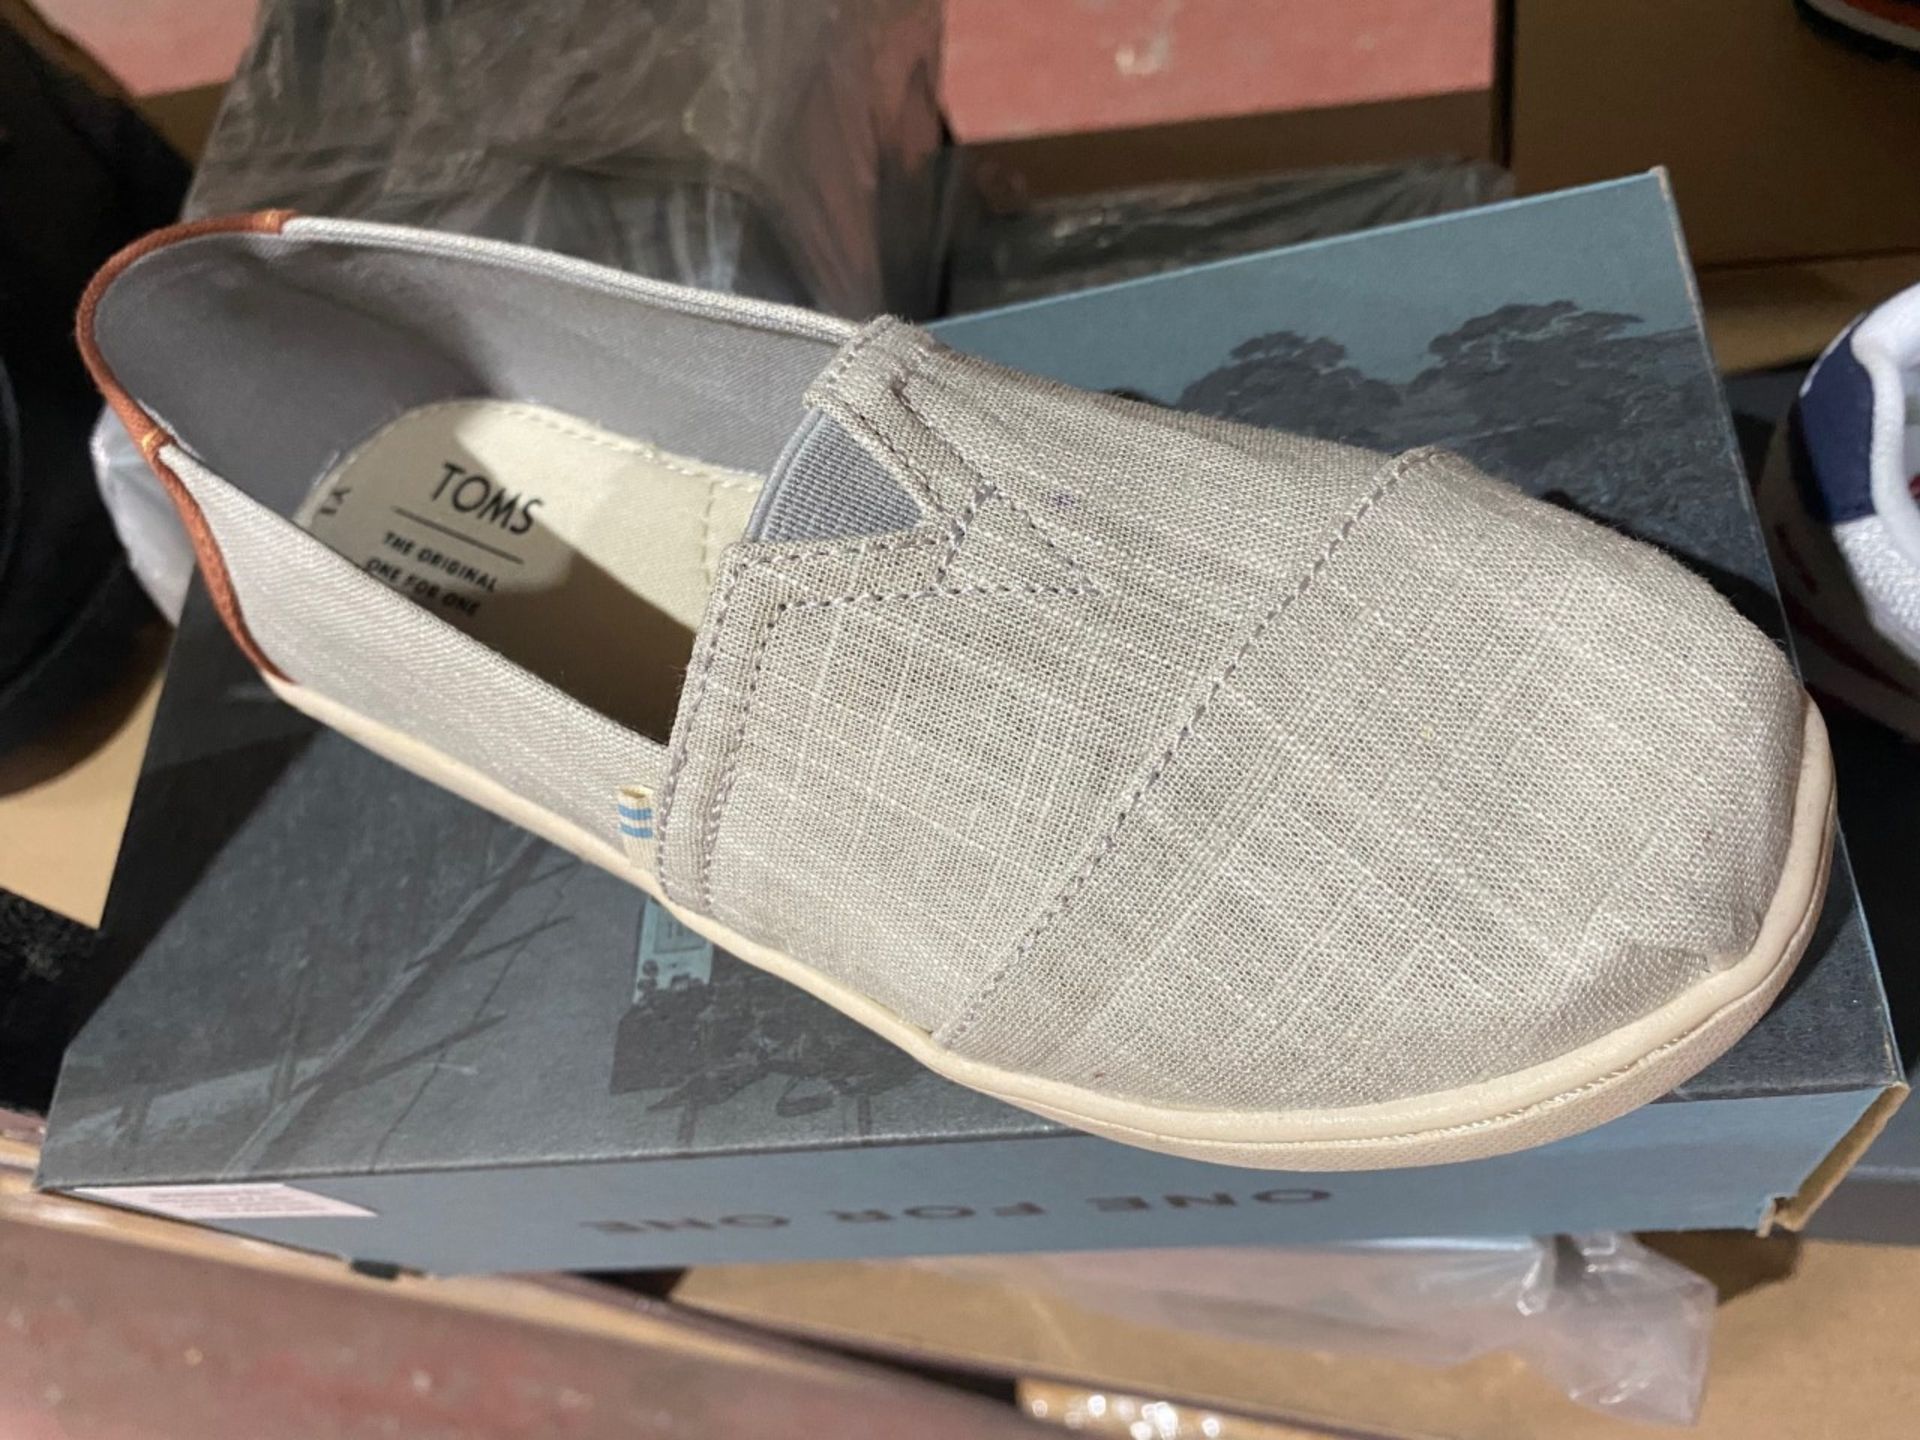 NEW & BOXED TOMS GREY SHOE SIZE INFANT 13 (33/14) - Image 2 of 2